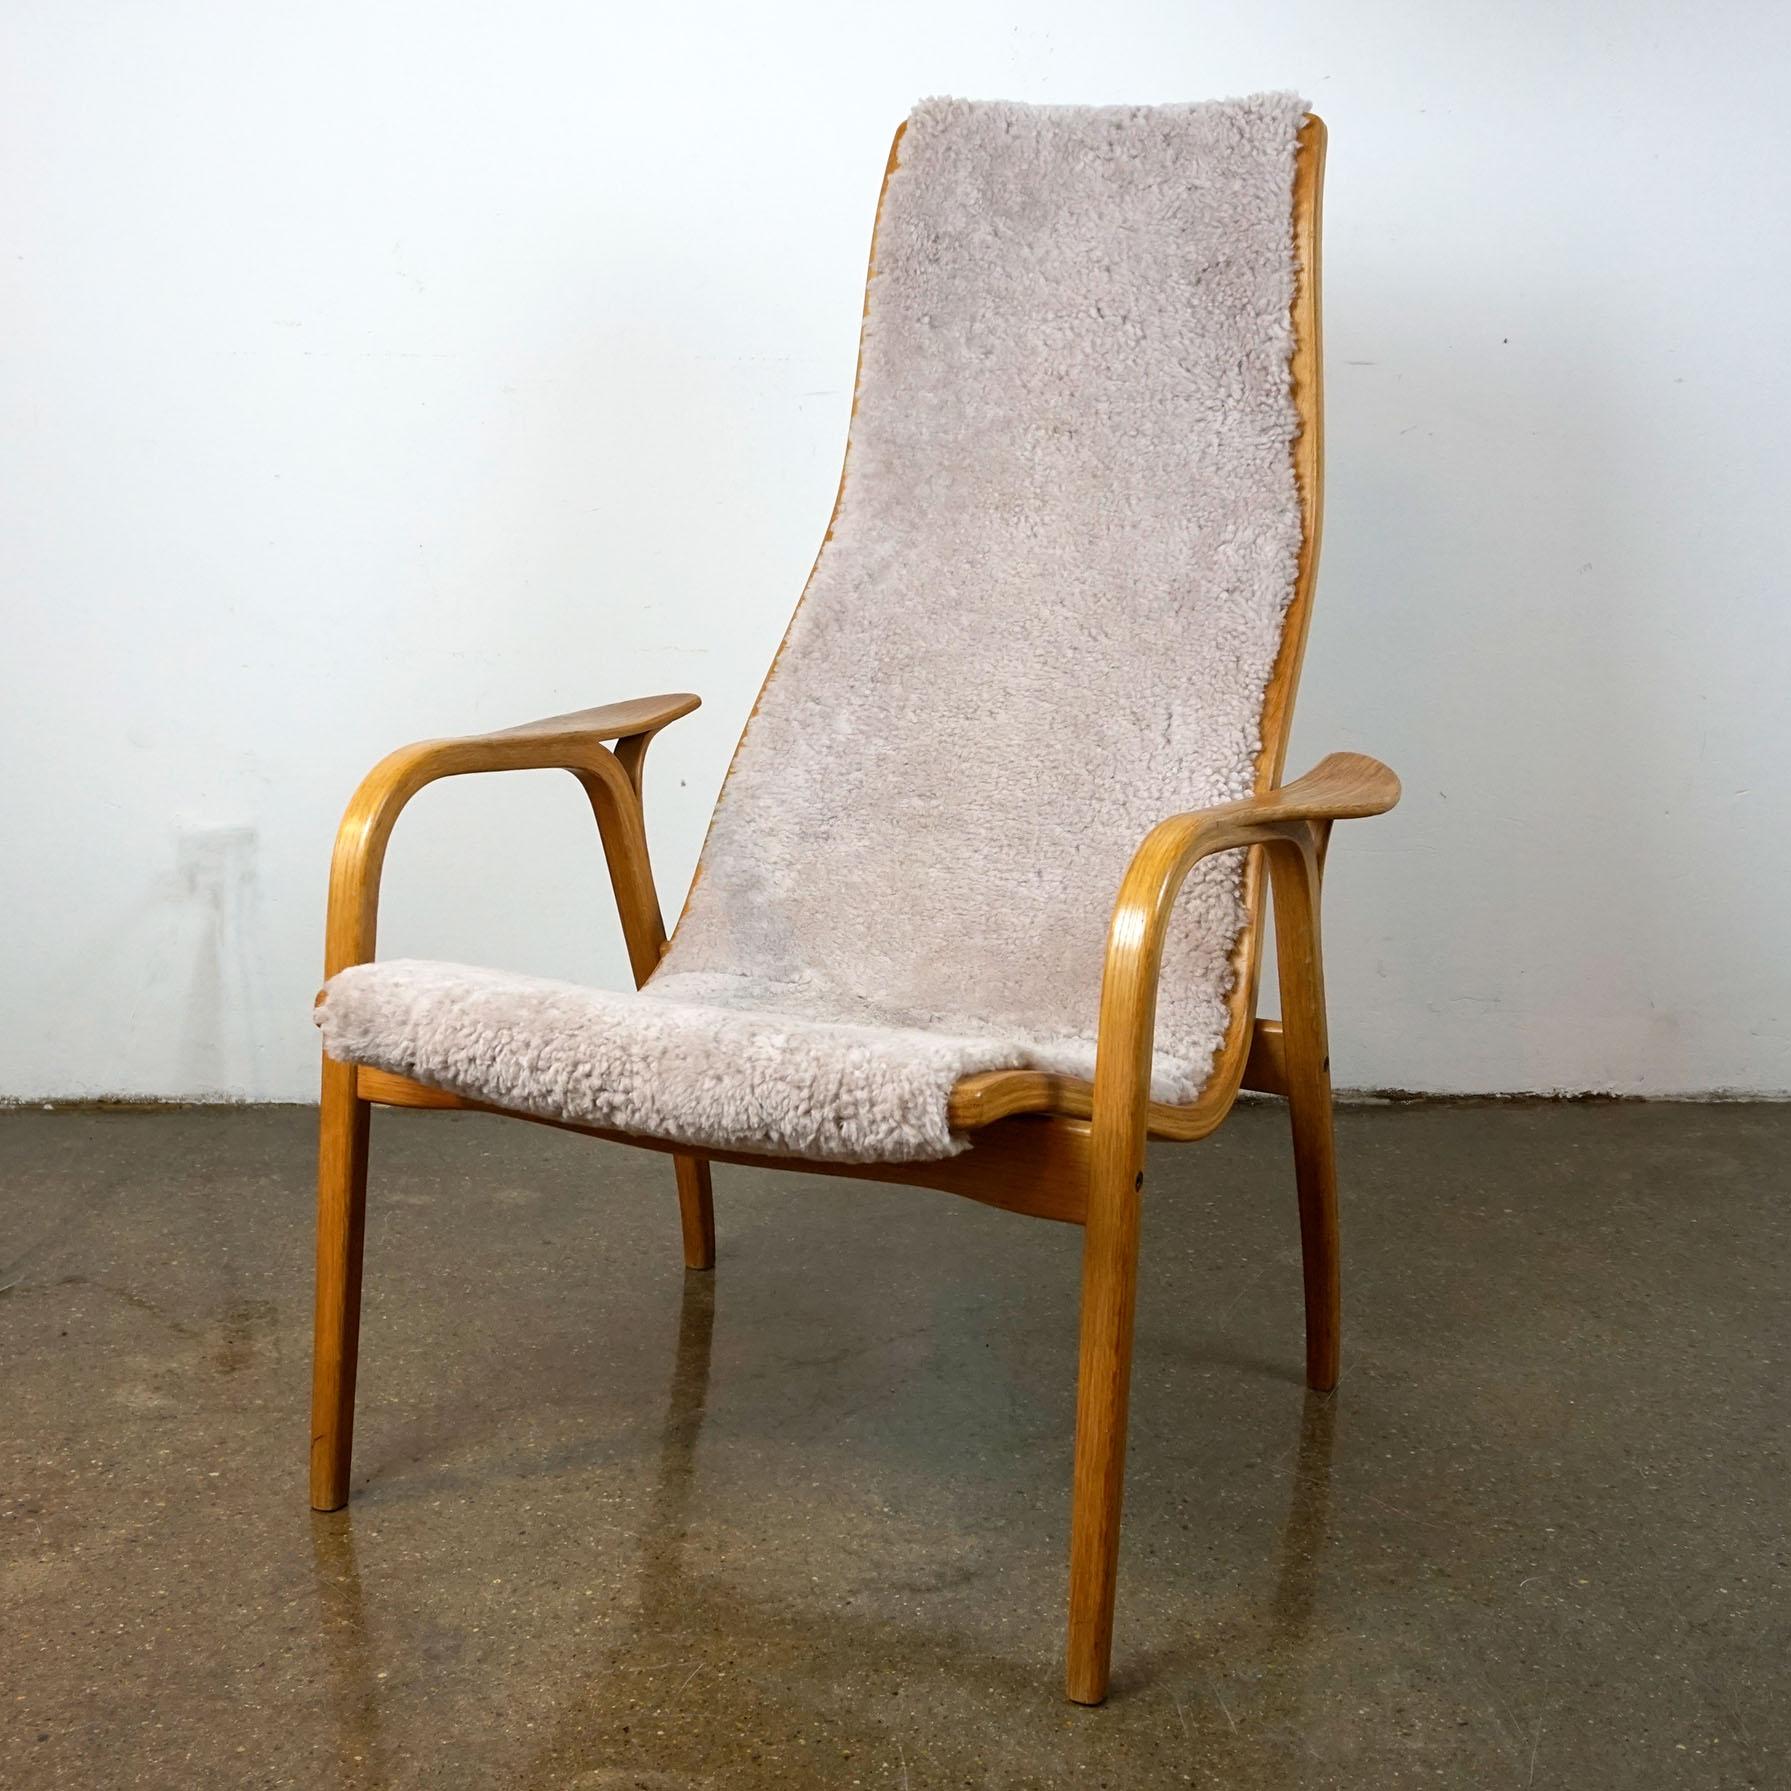 Ekströms Lamino chair, designed 1956, is one of the most comfortable chairs and a timeless sculptural Scandinavian design object. Natural Materials and excellent craftsmanship make it attractive for generations until now and into the future. It is a